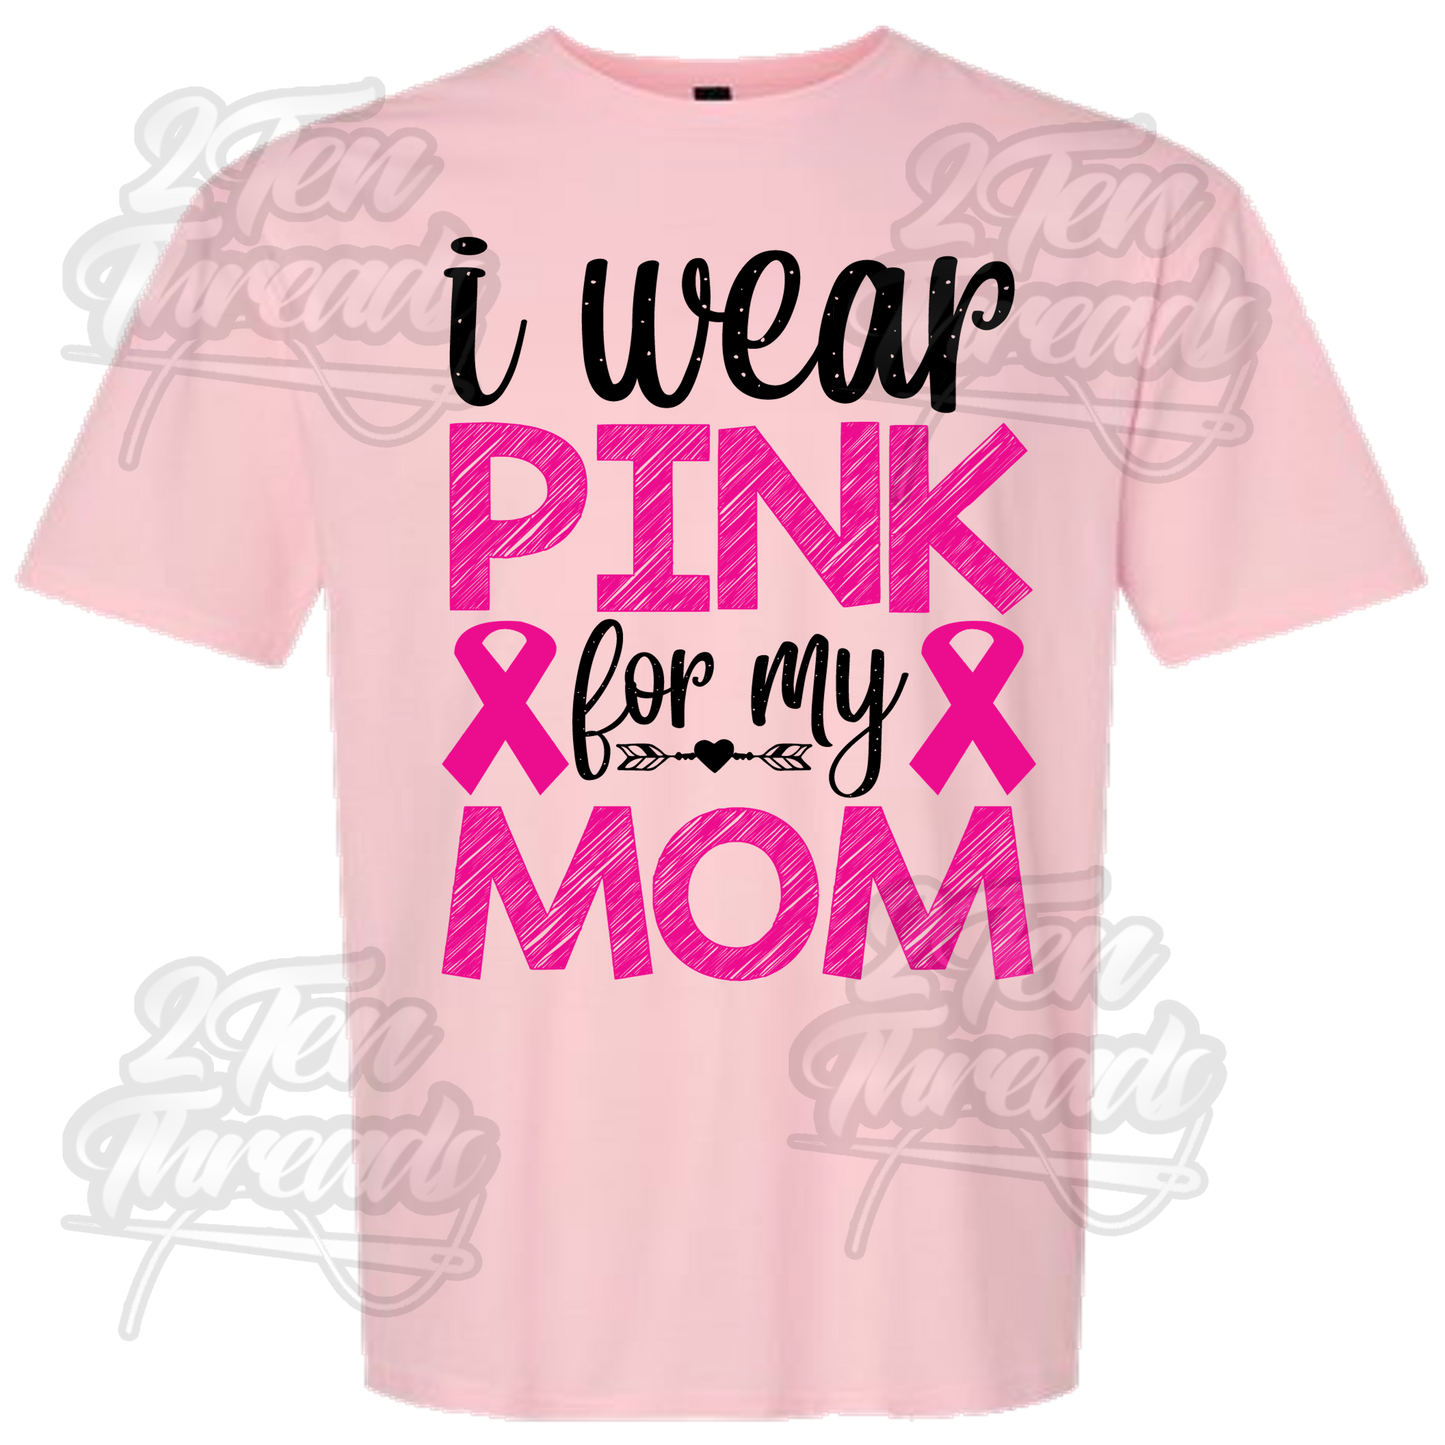 Pink for Mom Shirt